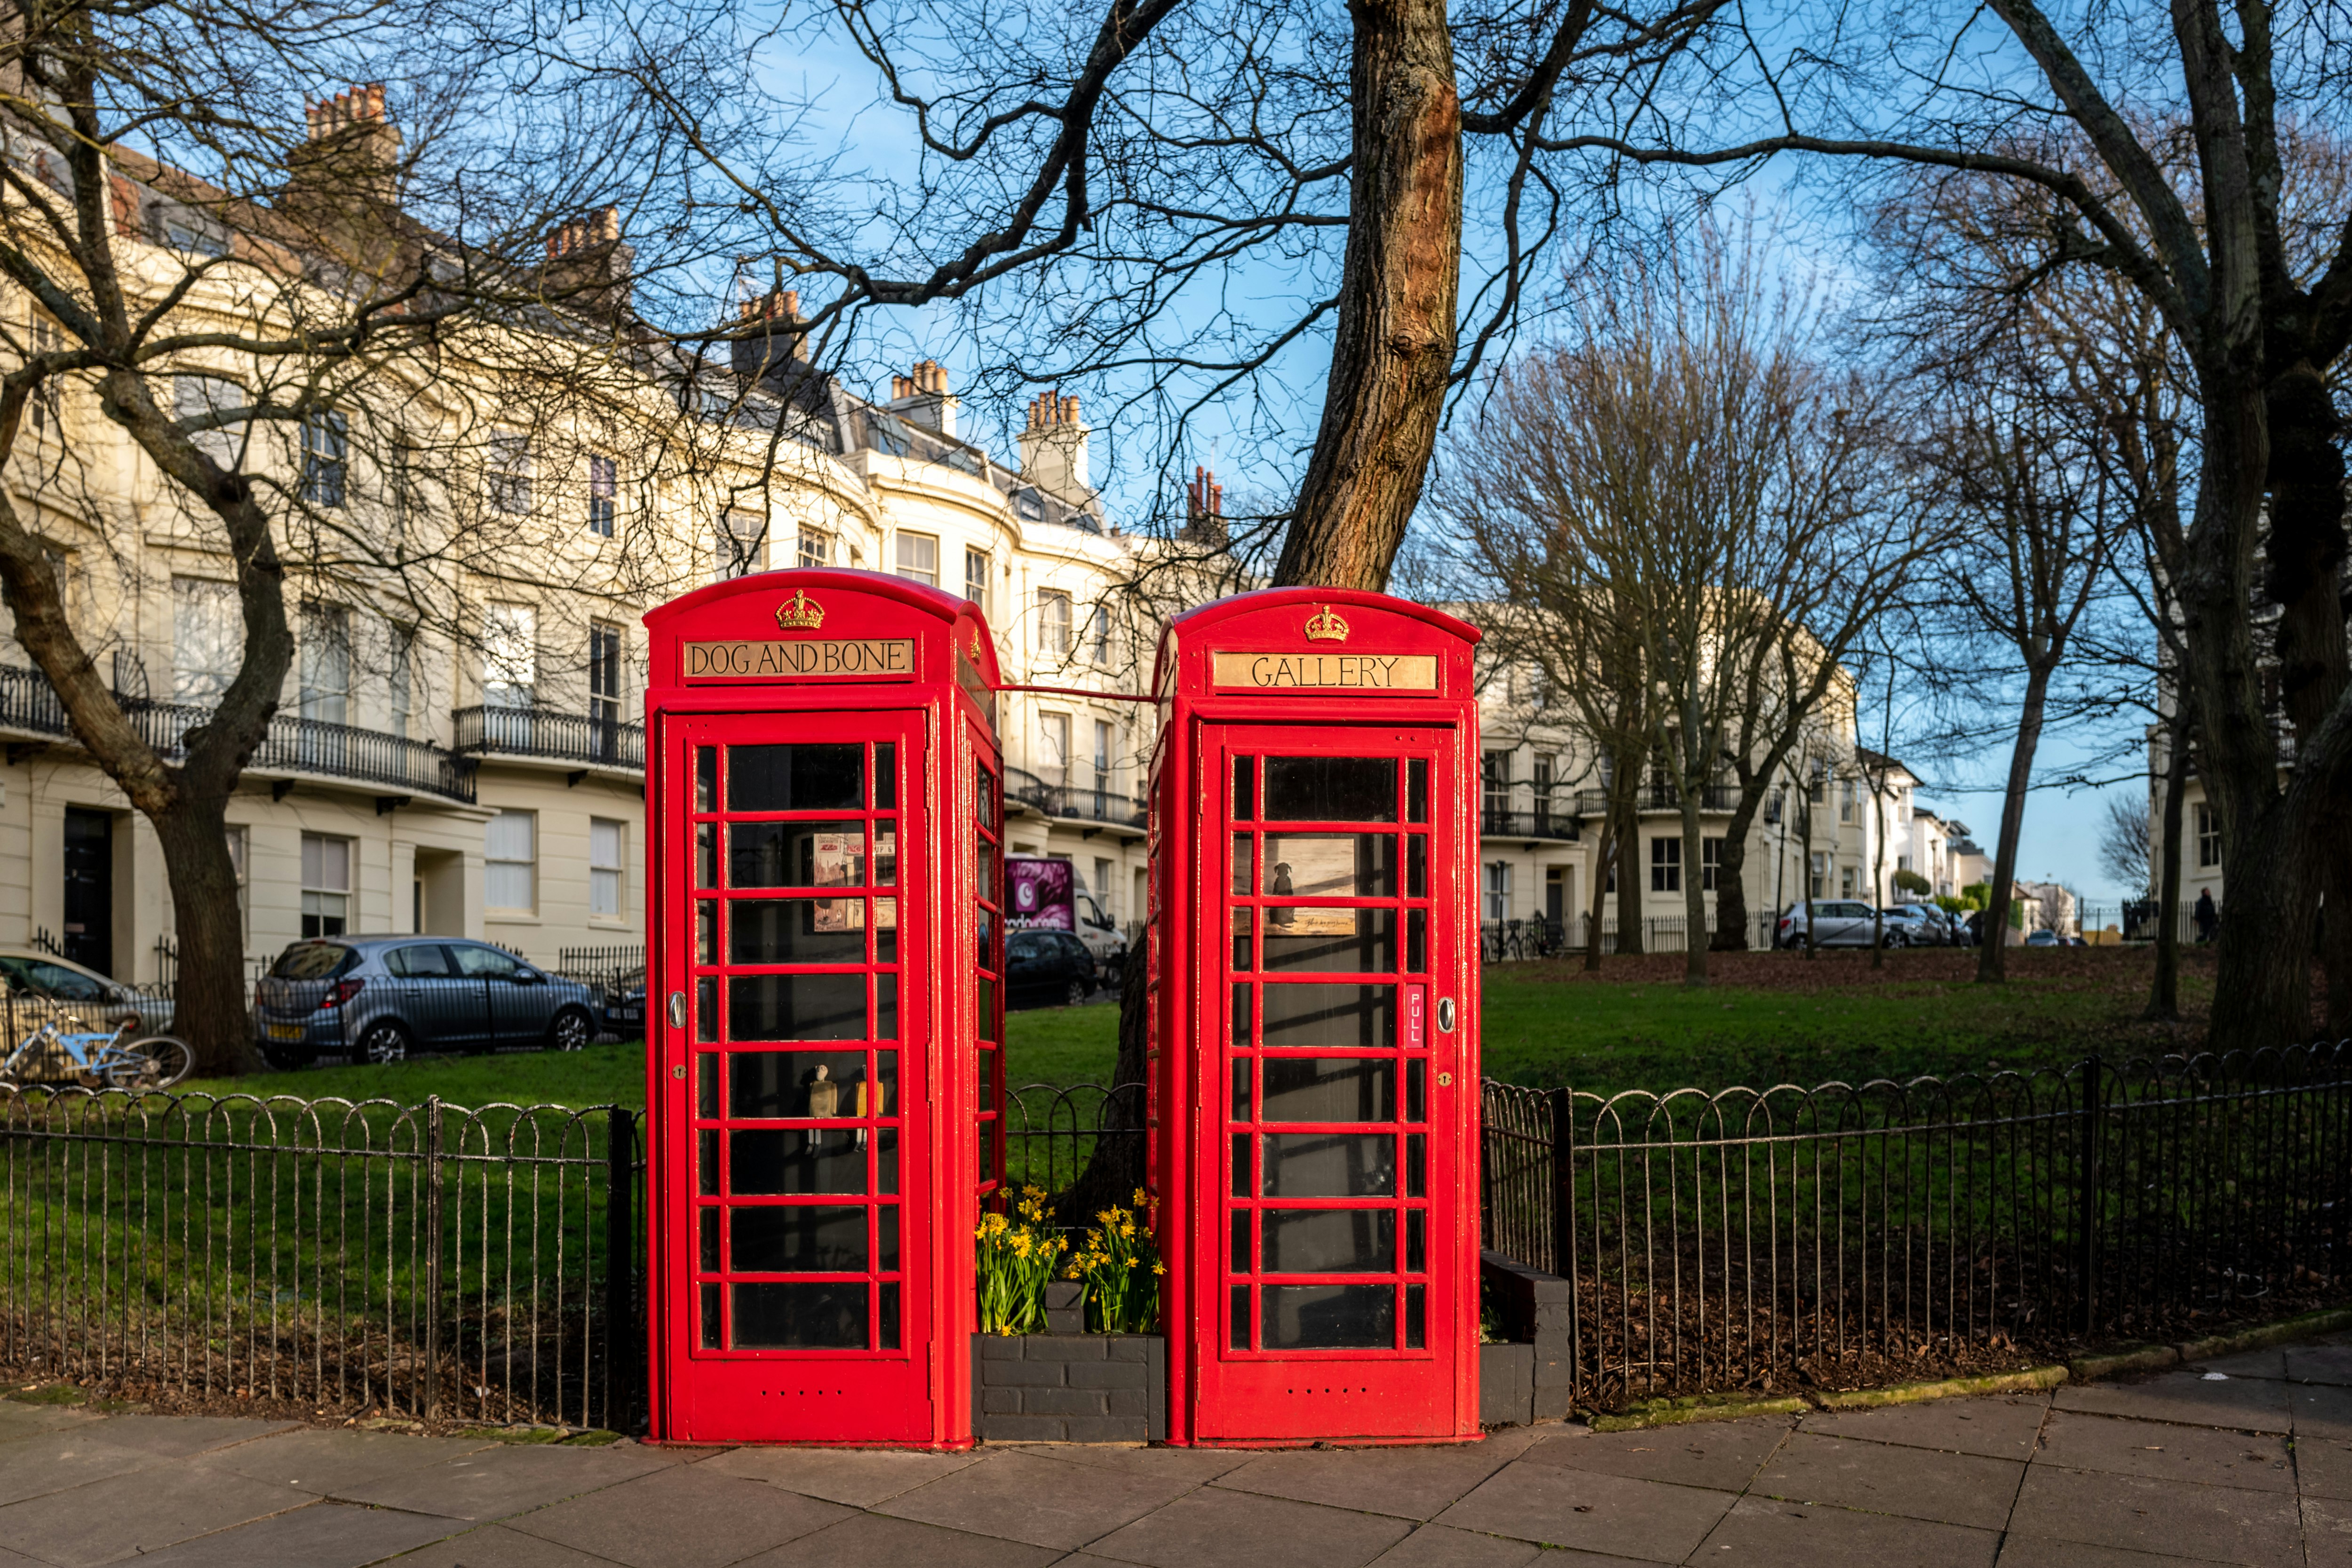 Two traditional red British phone boxes stand side by side on the edge of a green with iron railings around it. In the background is a row of grand white regency-style terraced townhouses.